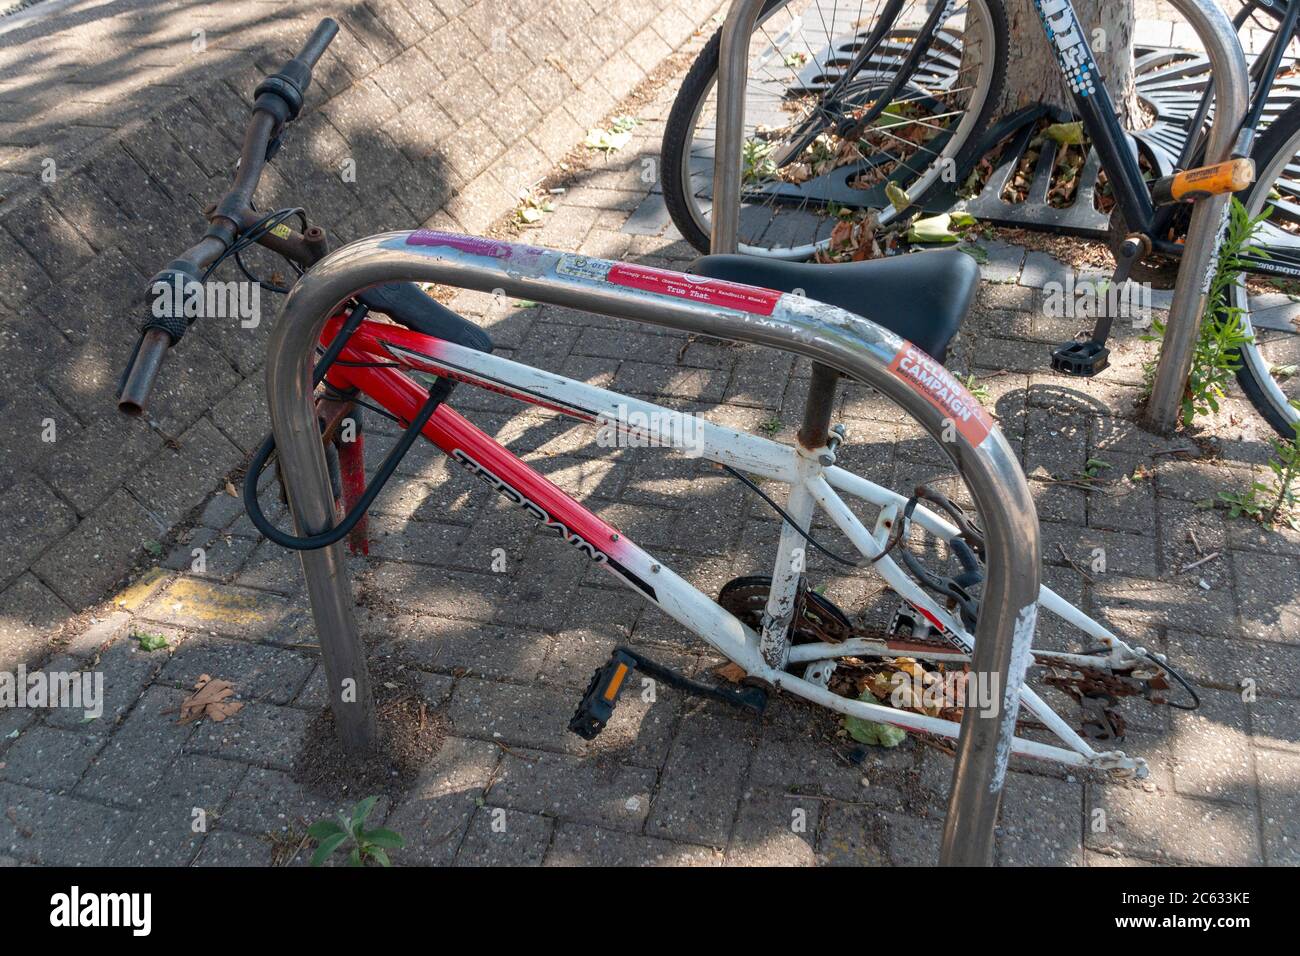 Bristol-June-2020-England-a close up view of a rusted old bicycle that has been abandoned and locked to a bike rake in the city where the wheels have Stock Photo